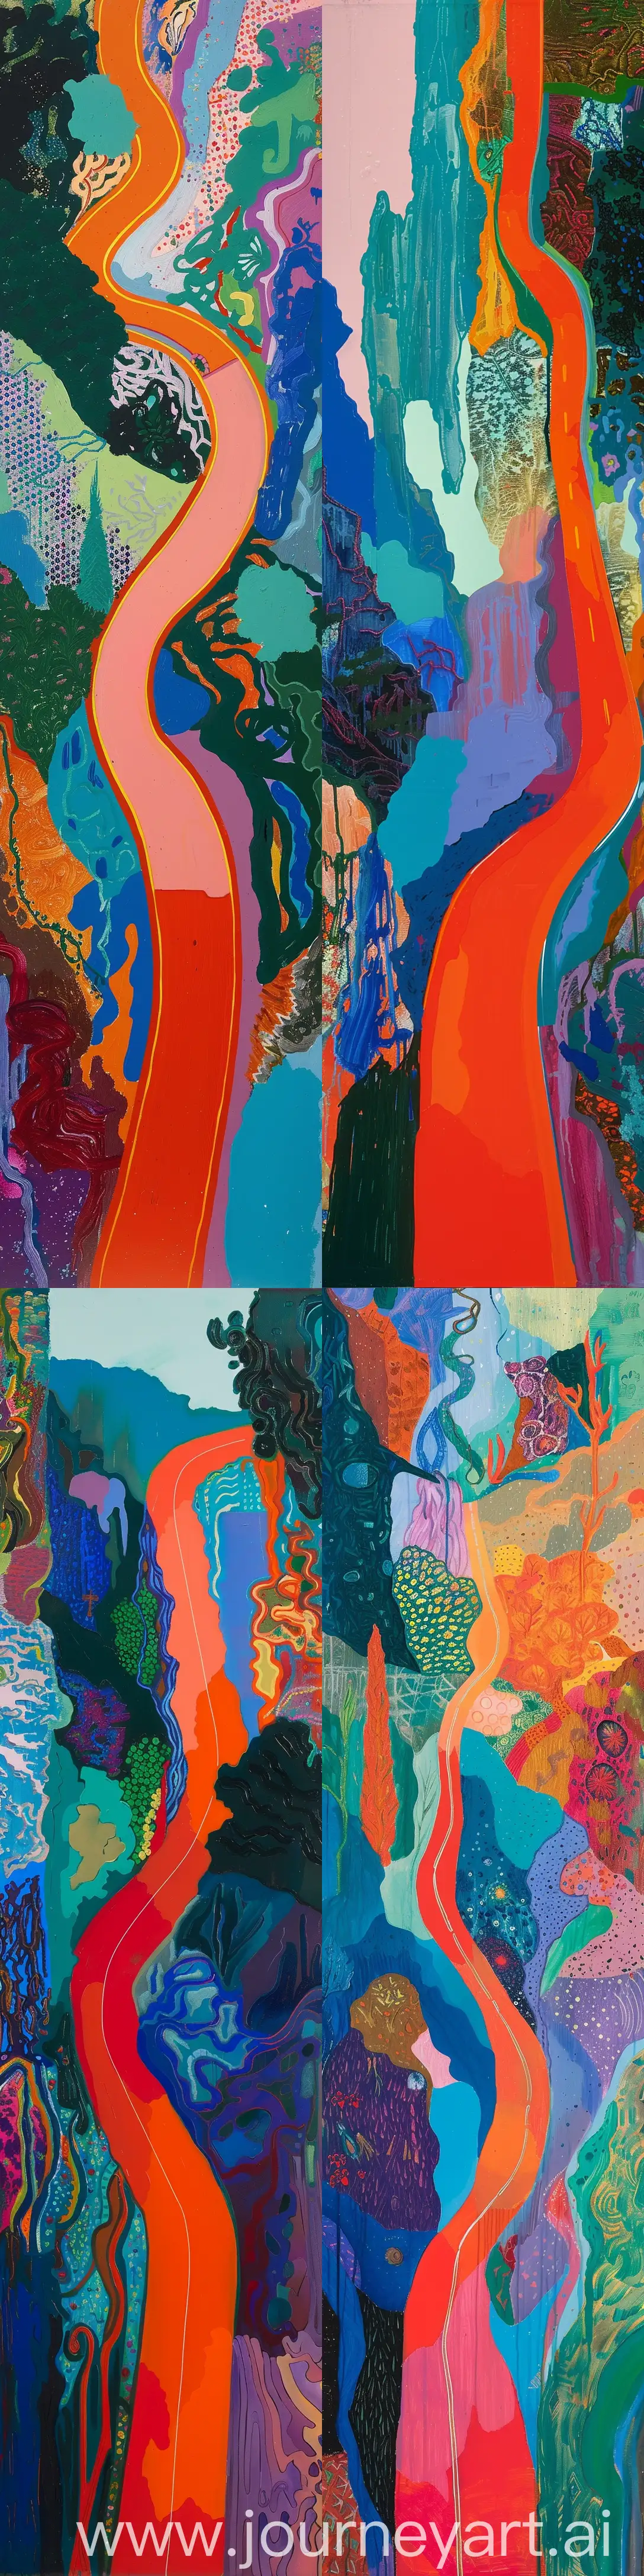 Oil painting which depicts a vibrant and colorful painting titled "Mulholland Drive: The Road to the Studio," created in 1980 using acrylic on canvas. The painting is an abstract representation of a landscape likely inspired by the famous Mulholland Drive in Los Angeles.

The composition is dominated by a winding road that snakes through the canvas from the lower right corner to the upper left side. The road is rendered in a bright red color, which stands out against the various shades of blue, green, orange, and purple that make up the surrounding environment.

On either side of the road, there are abstract shapes and patterns that suggest natural formations such as hills or mountains, as well as structures that could be interpreted as buildings or trees. The use of color is bold and expressive, with contrasting hues placed next to each other to create a sense of depth and movement.

The painting has a dynamic and somewhat chaotic feel, with the eye being drawn along the curves of the road and the intricate patterns of the landscape. It seems to capture the energy and complexity of a journey through a vividly imagined version of the Californian terrain.

the painting is a striking example of modern abstract art, with a strong use of color and form to convey a sense of place and motion --ar 4:16